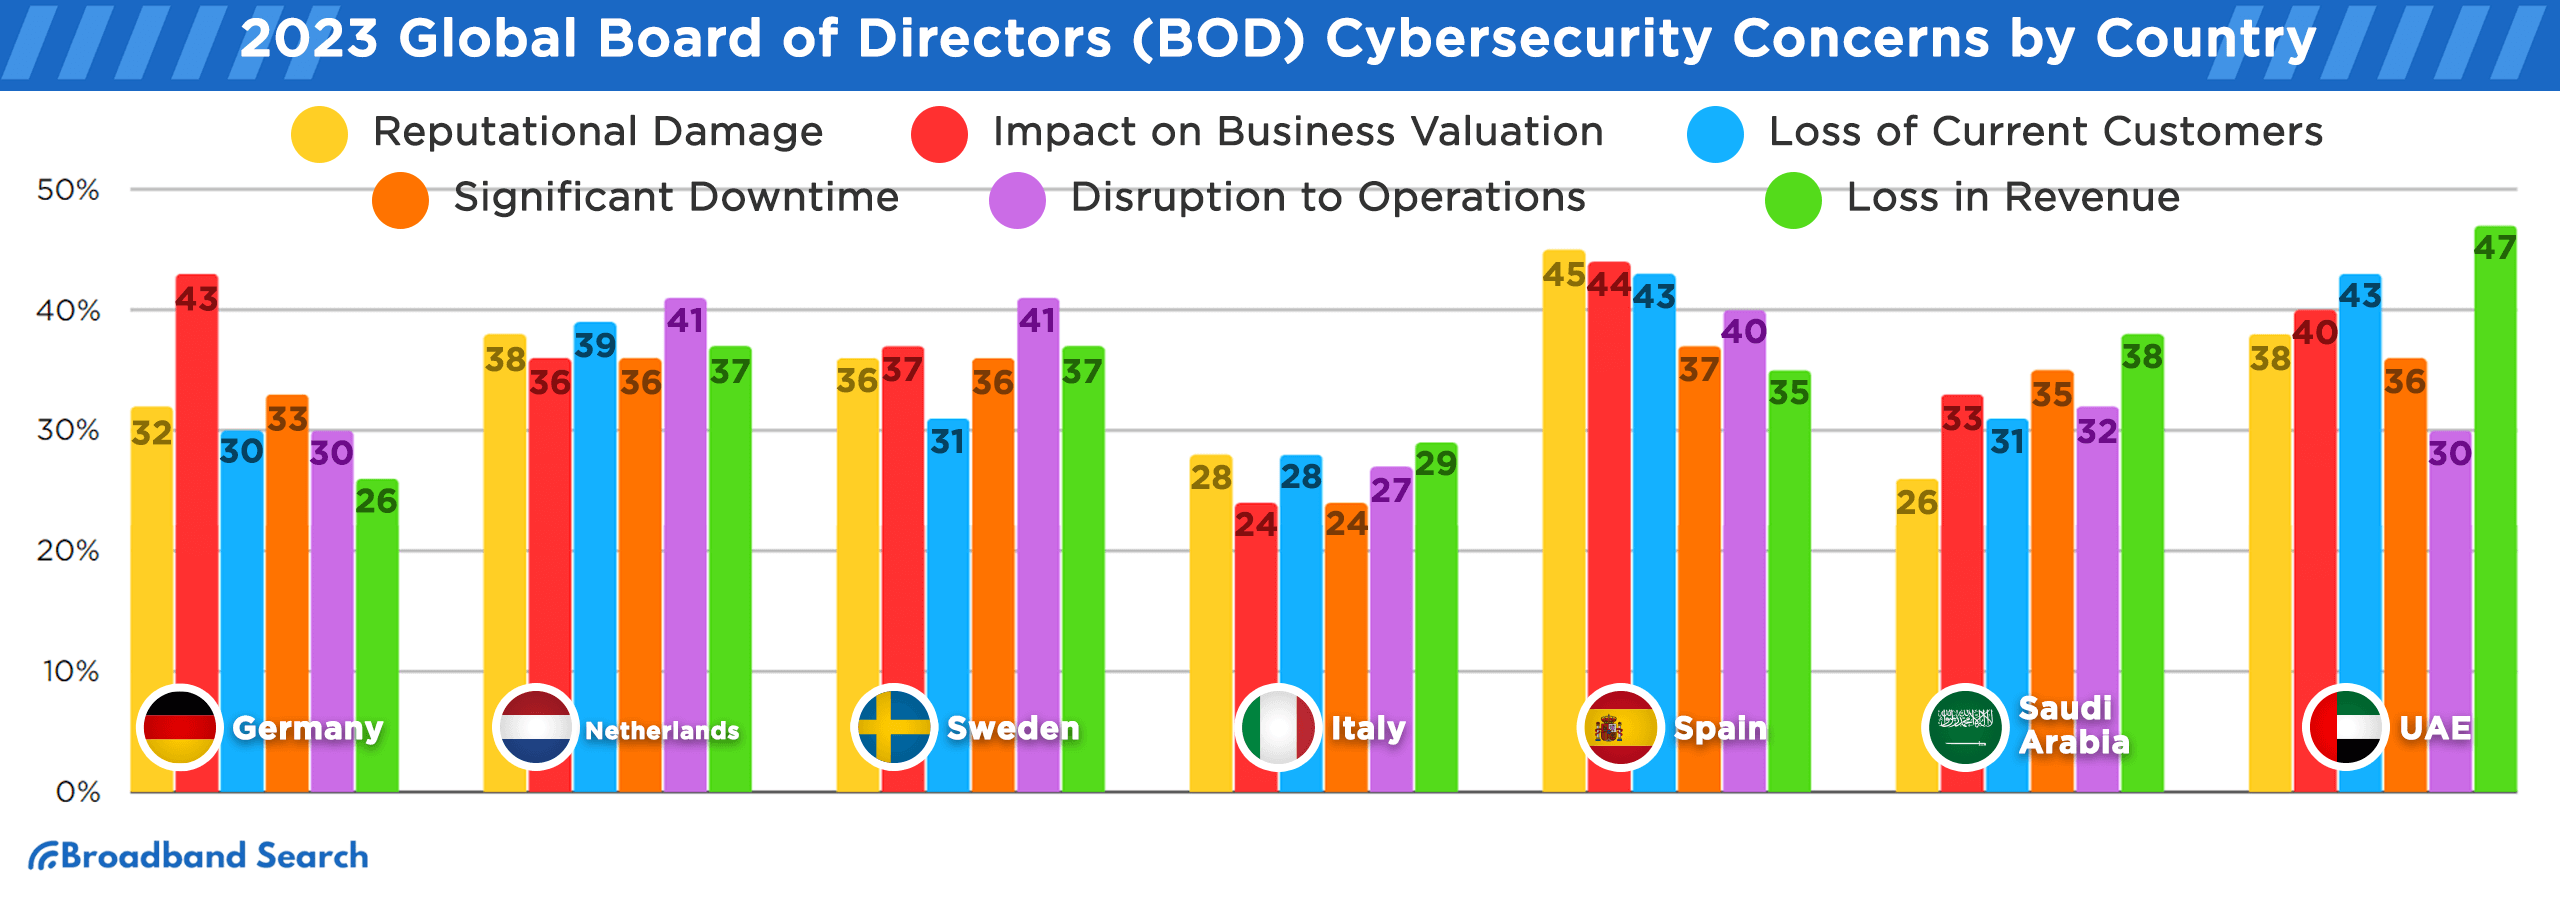 2023 global board of directors (BOD) cybersecurity concerns by country like Germany, Netherlands, Sweden, Italy, Spain, Saudi Arabia, UAE